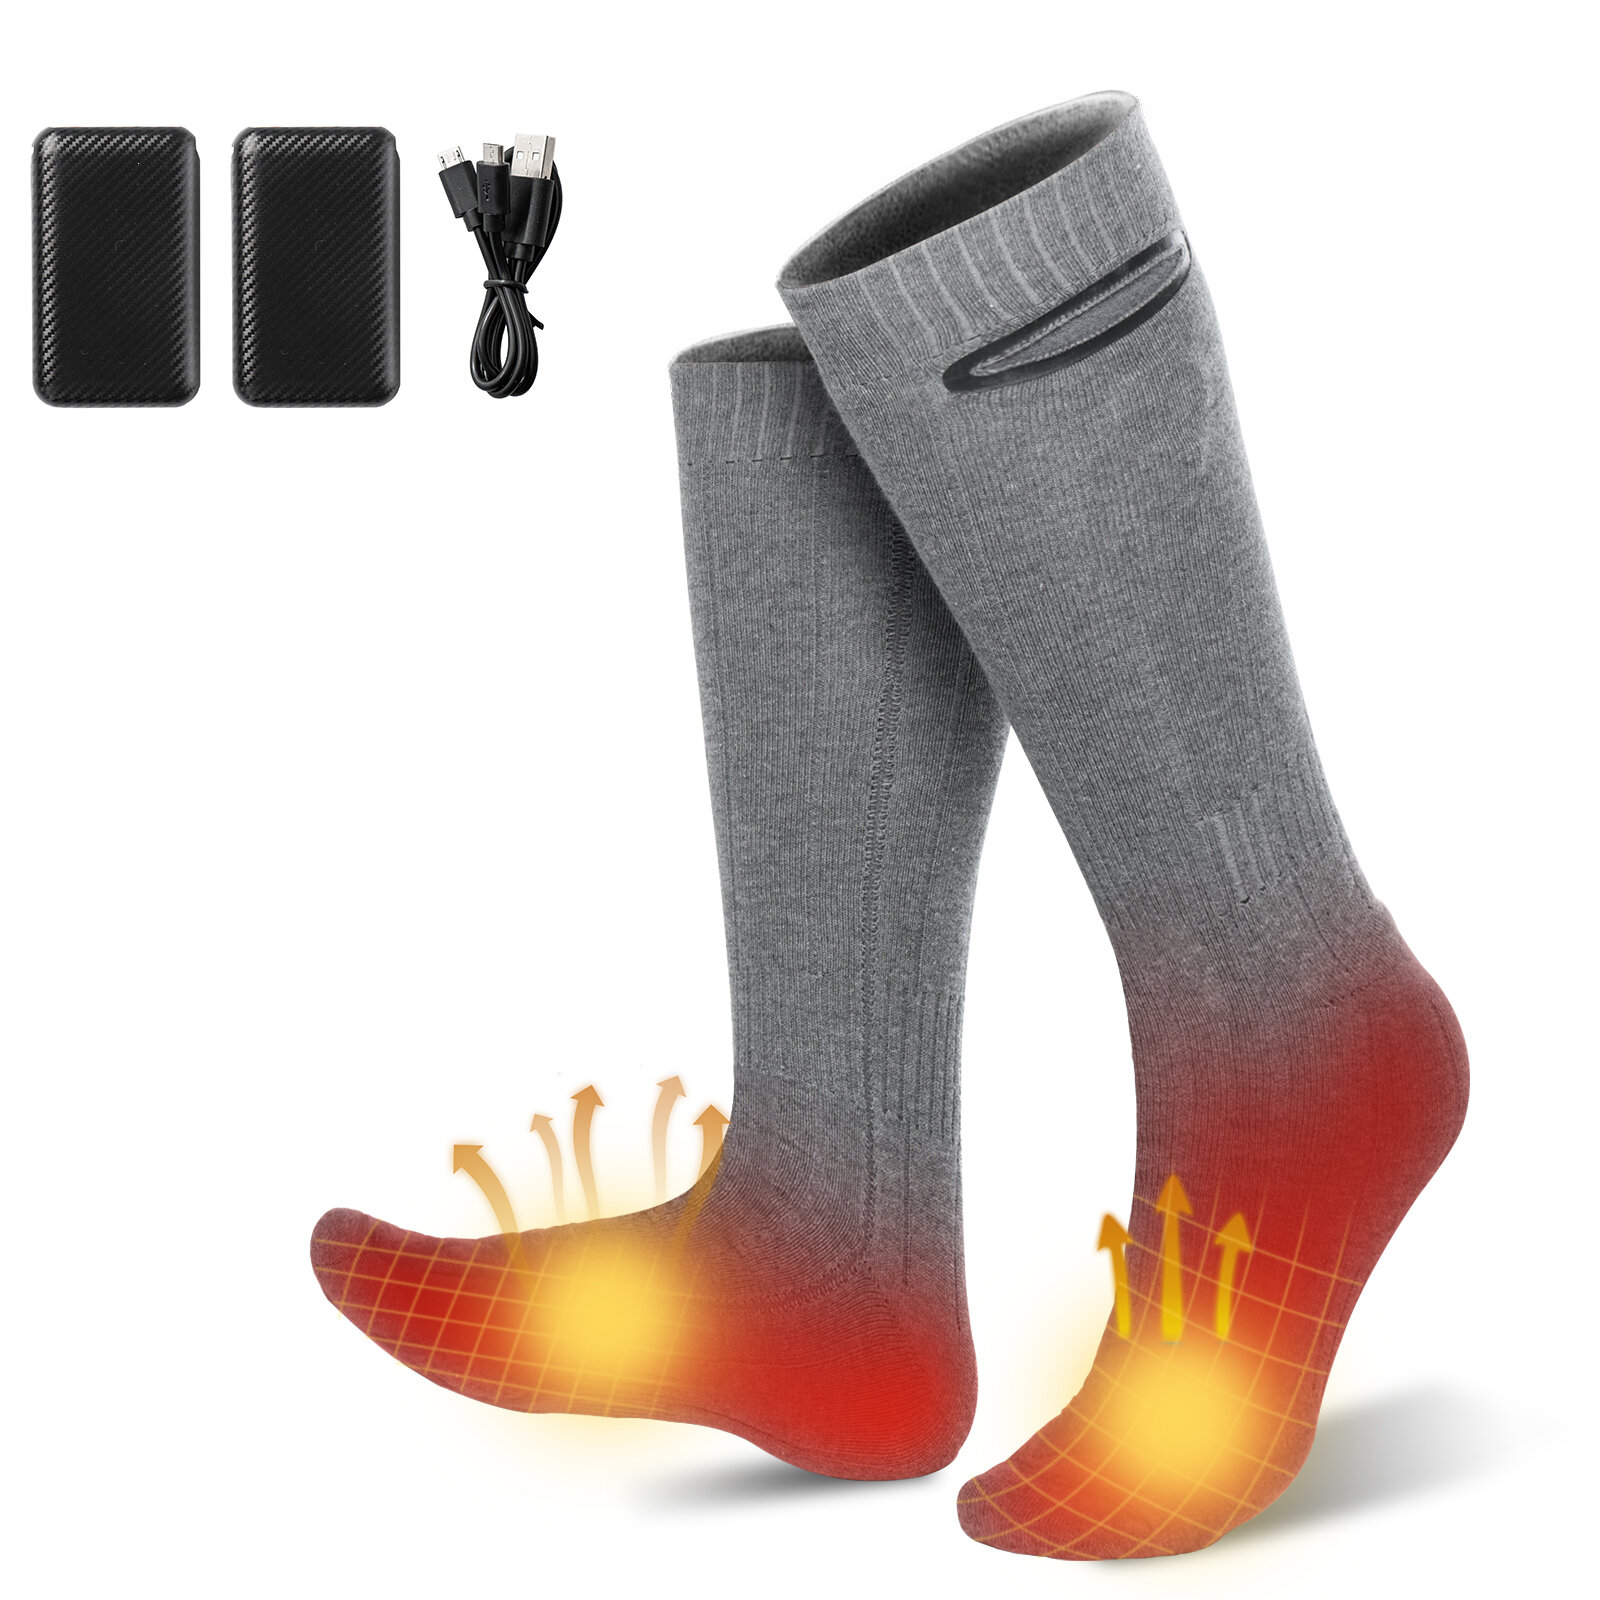 Image of Unisex Heated Socks Electric Heated Socks Rechargeable 37v 4500mAh Foot Warmer Thermal Socks Warm Winter Socks For Outd